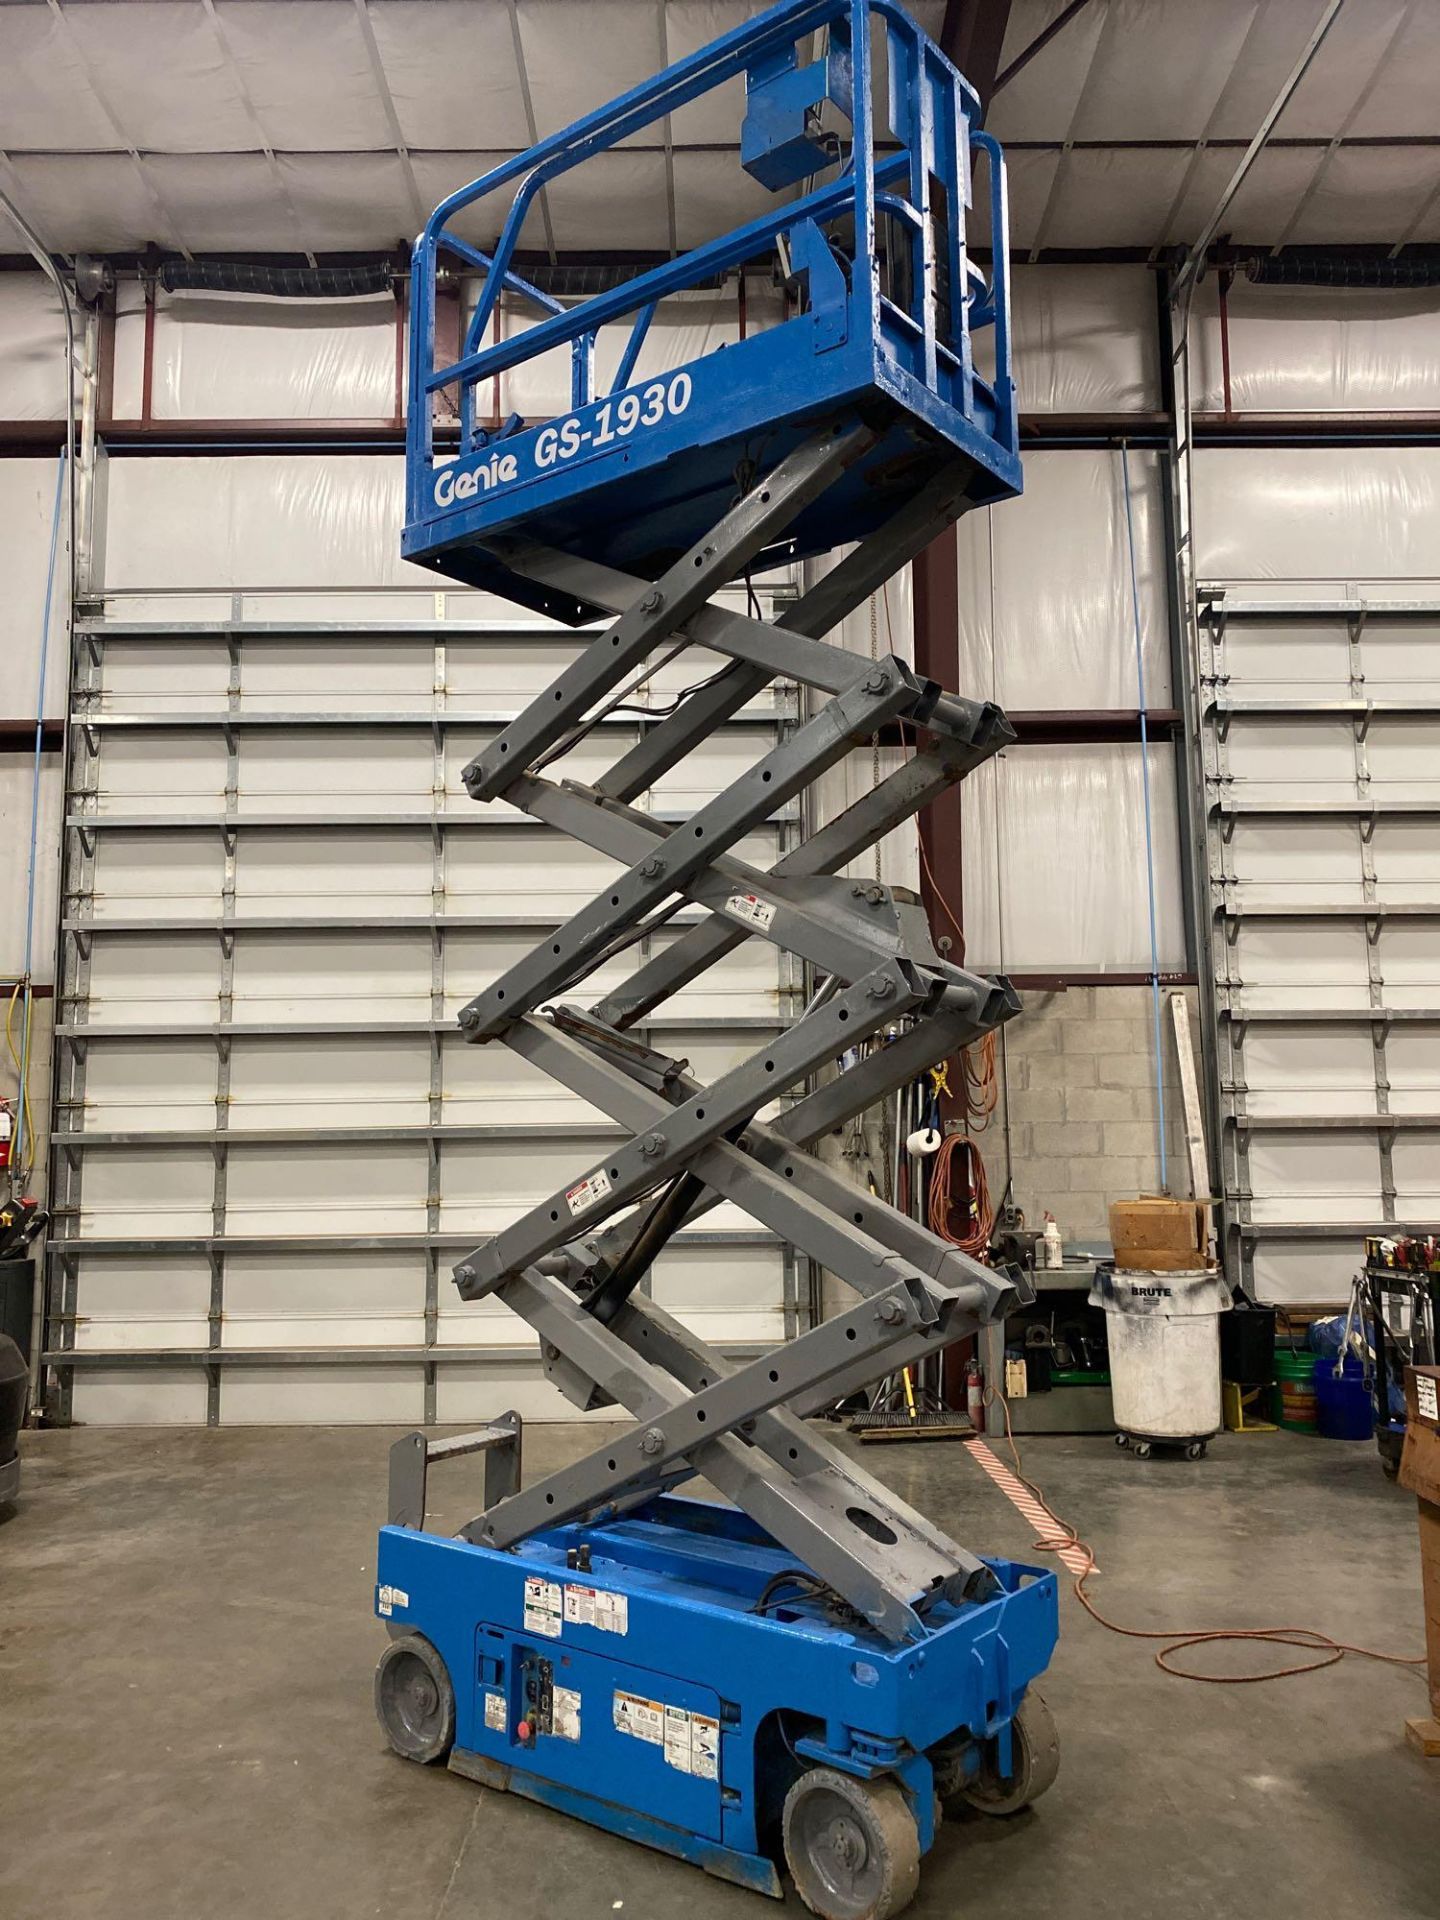 GENIE GS1930 SCISSOR LIFT, SELF PROPELLED, 19' PLATFORM HEIGHT, BUILT IN BATTERY CHARGER, SLIDE OUT - Image 10 of 10